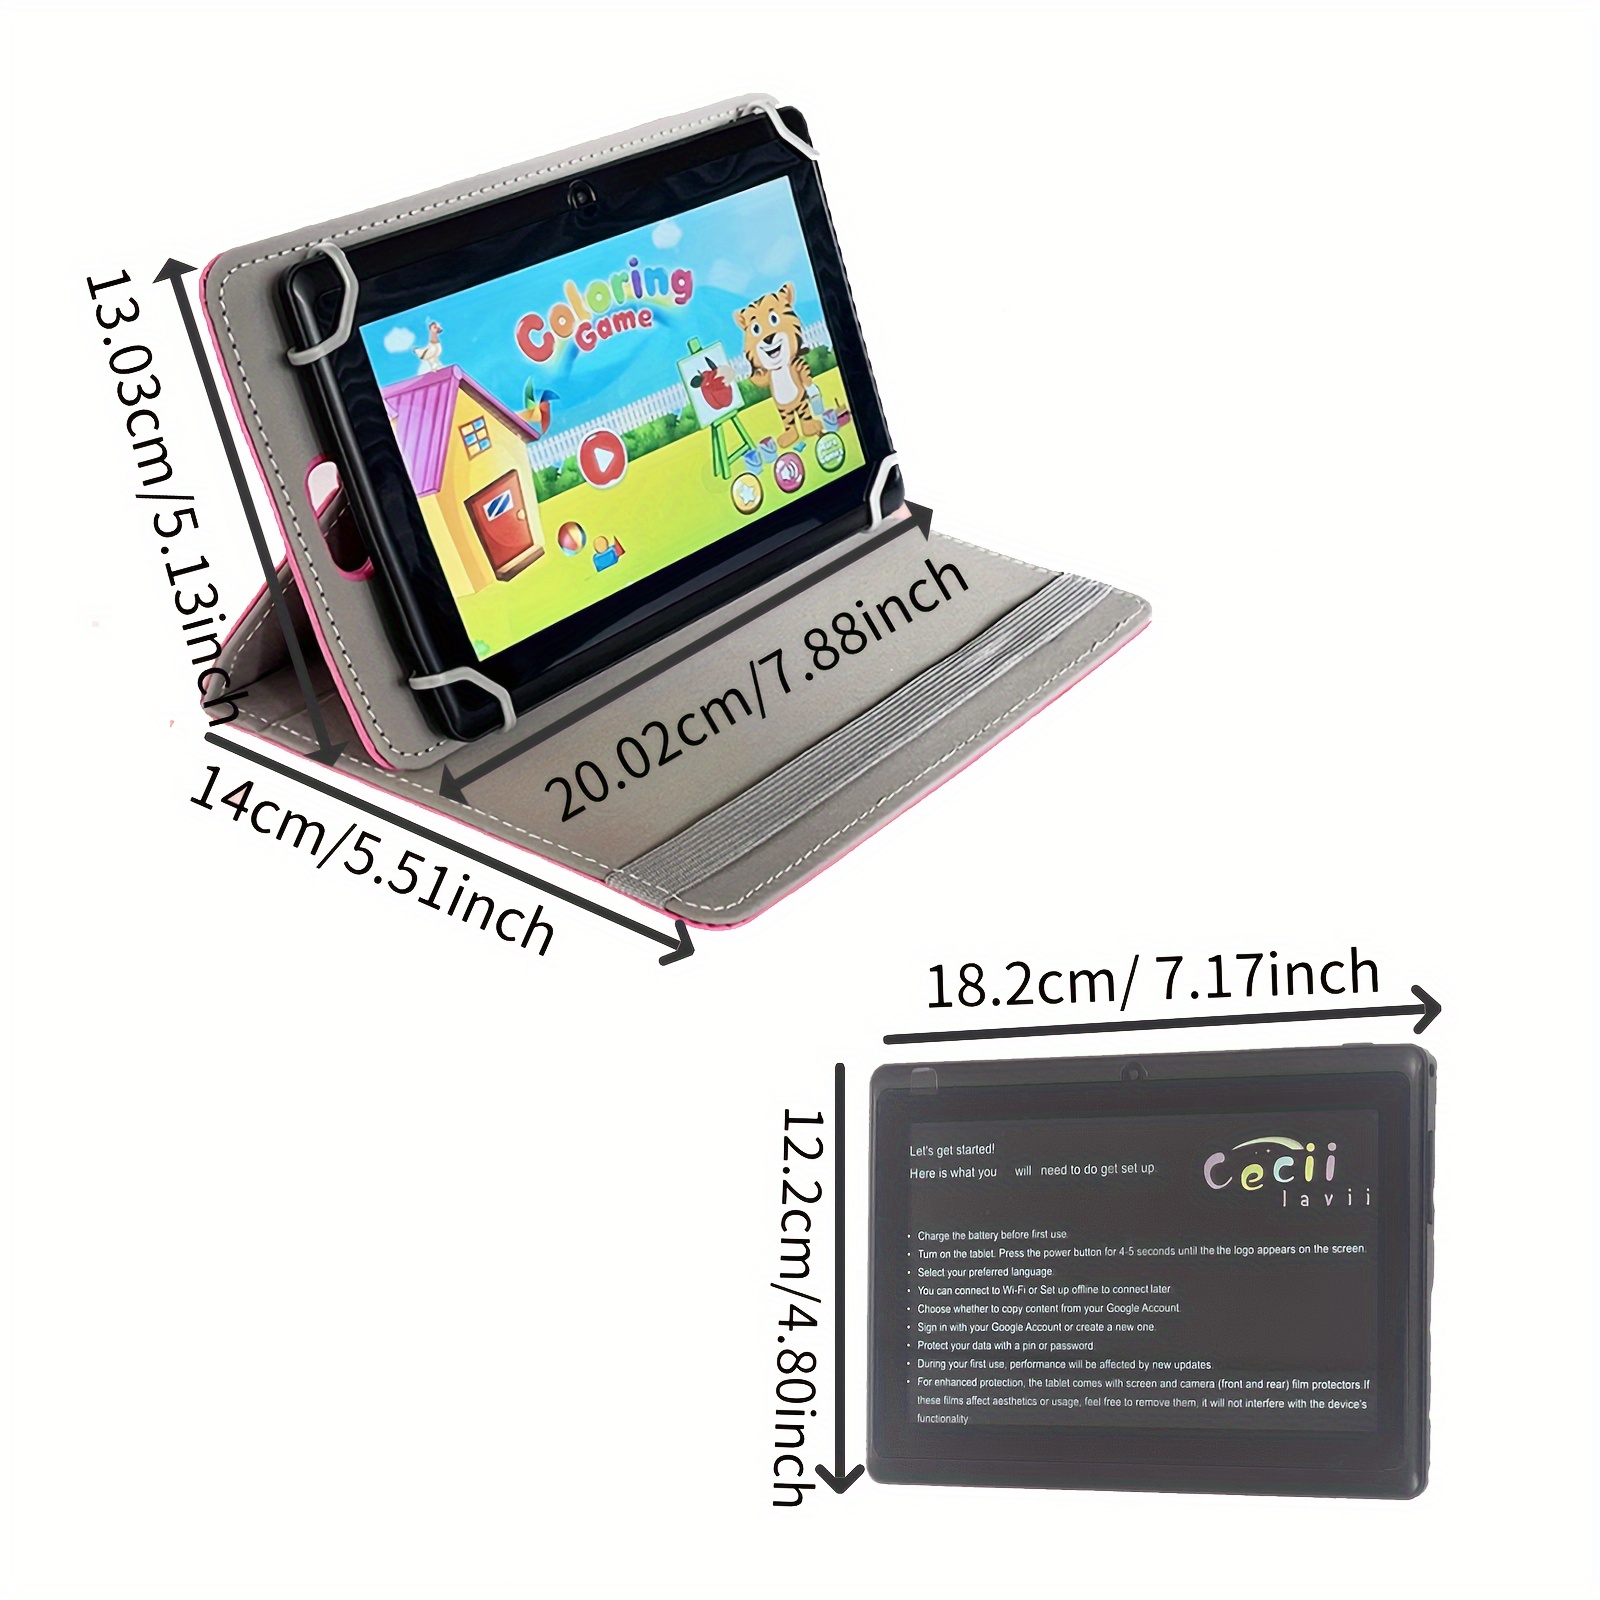 tablet study pad 7 inch educational toy preschool study 32grom safety contents eye protect hd screen 2camera parental lock g silicone protect montessori education toy usb supply